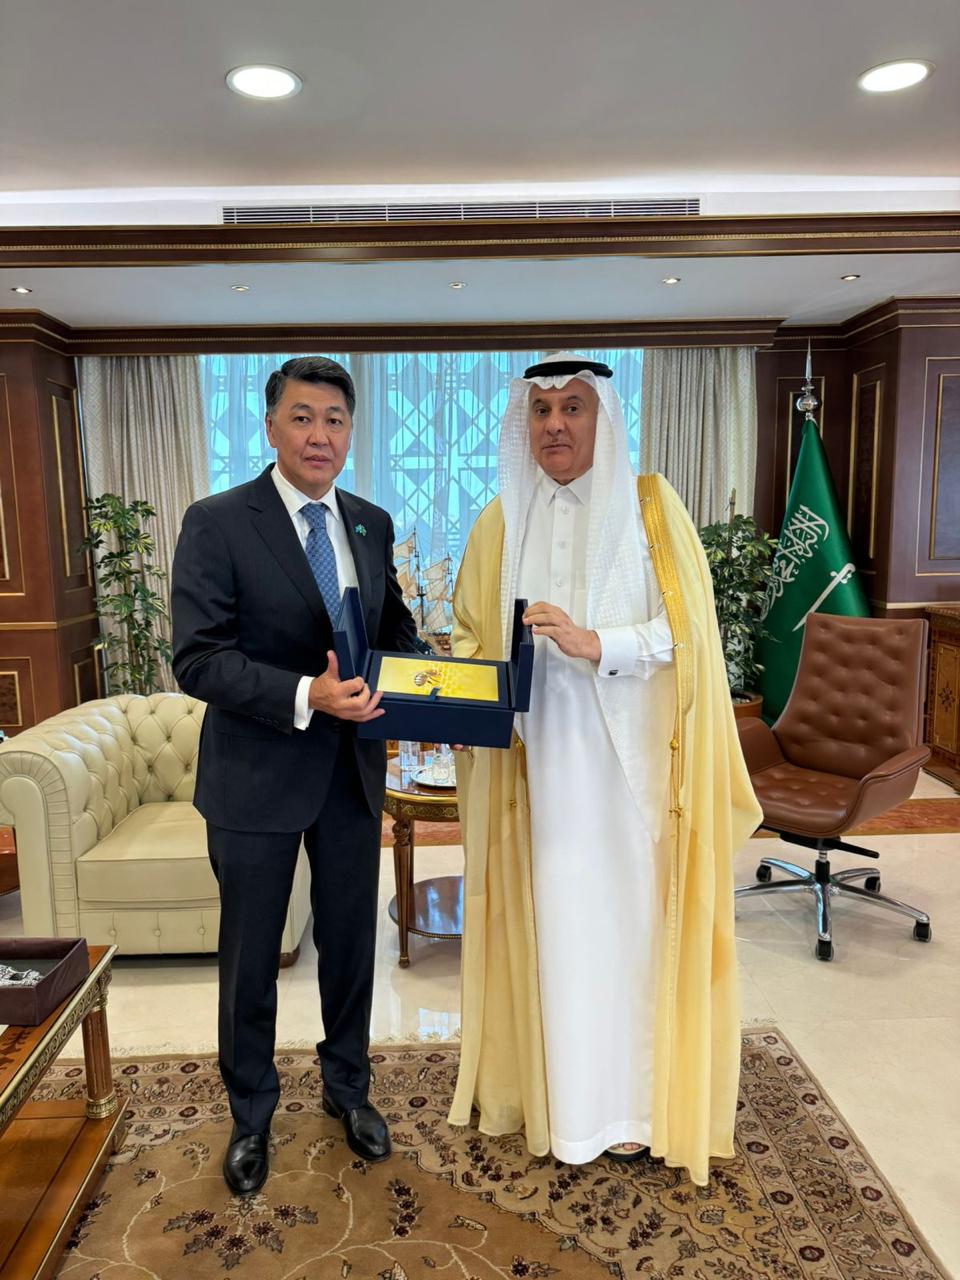 The Minister of Environment, Water and Agriculture of Saudi Arabia is interested in further strengthening cooperation with Kazakhstan